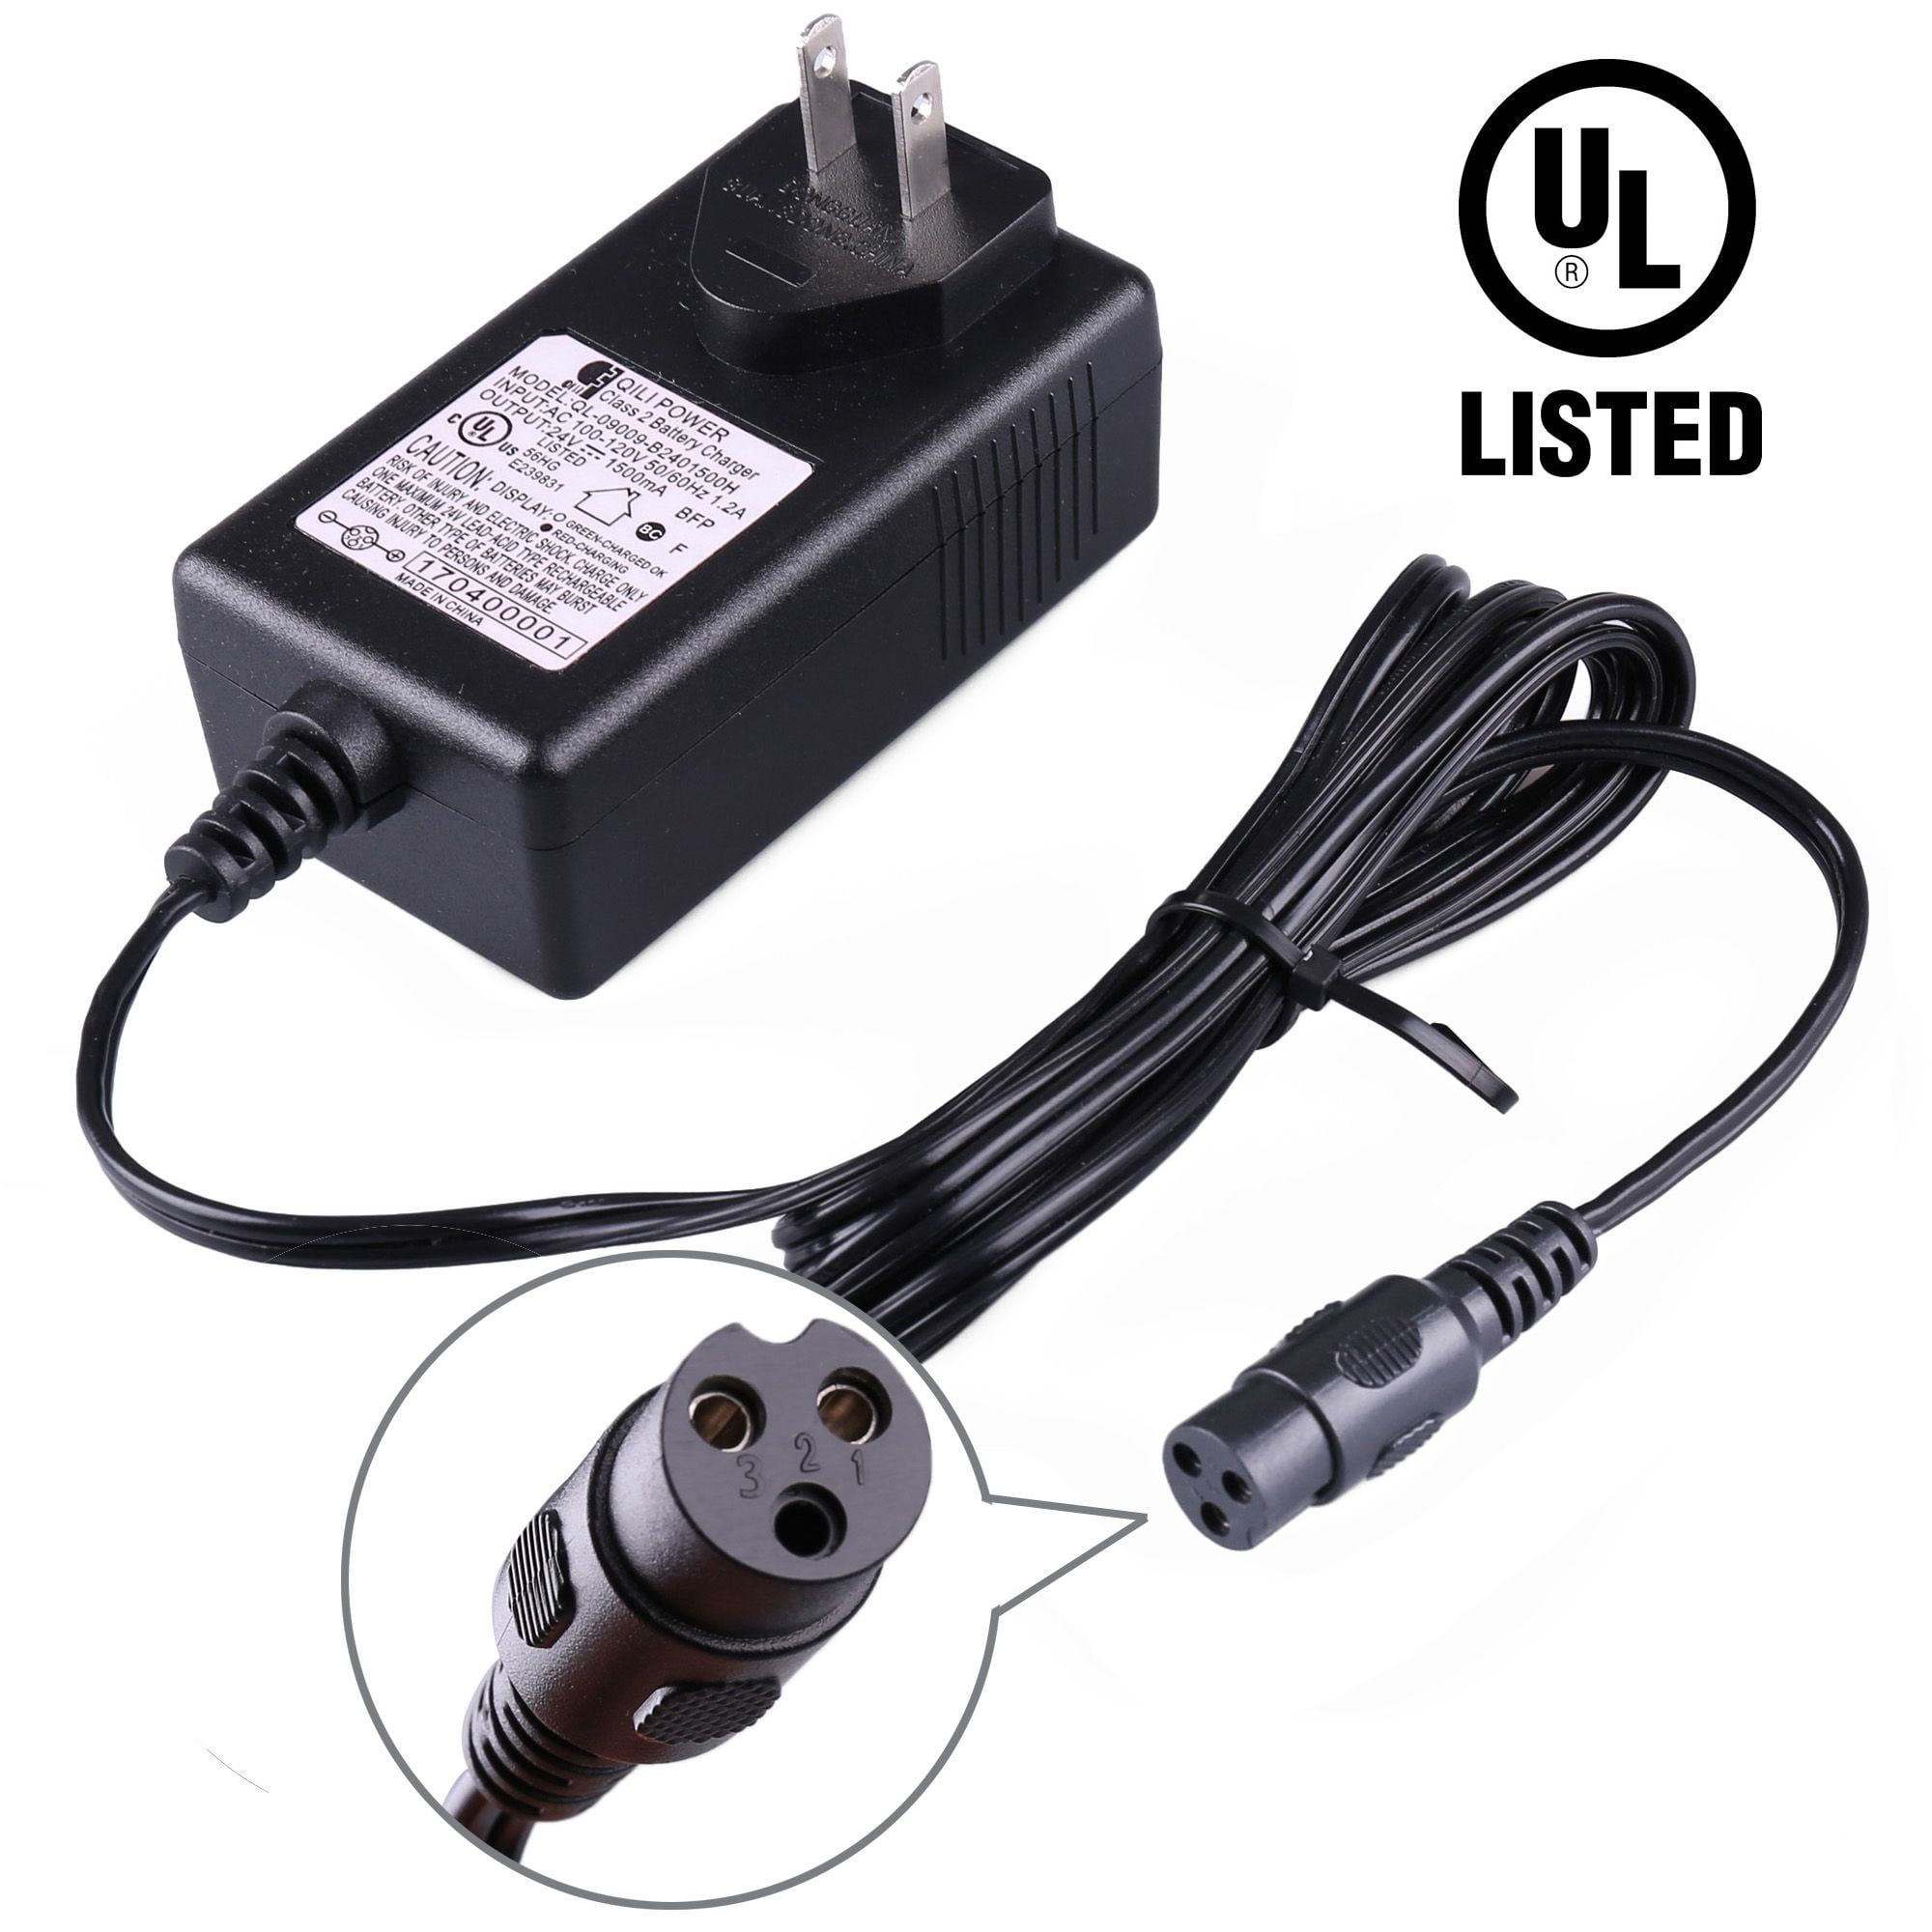 Urabiu 36W Electric Scooter Battery Charger for Razor E175 E125 E150 E500 Pocket Mod Sports Mod and Dirt Quad 3-Prong Inline Scooter Power Supply Cord 